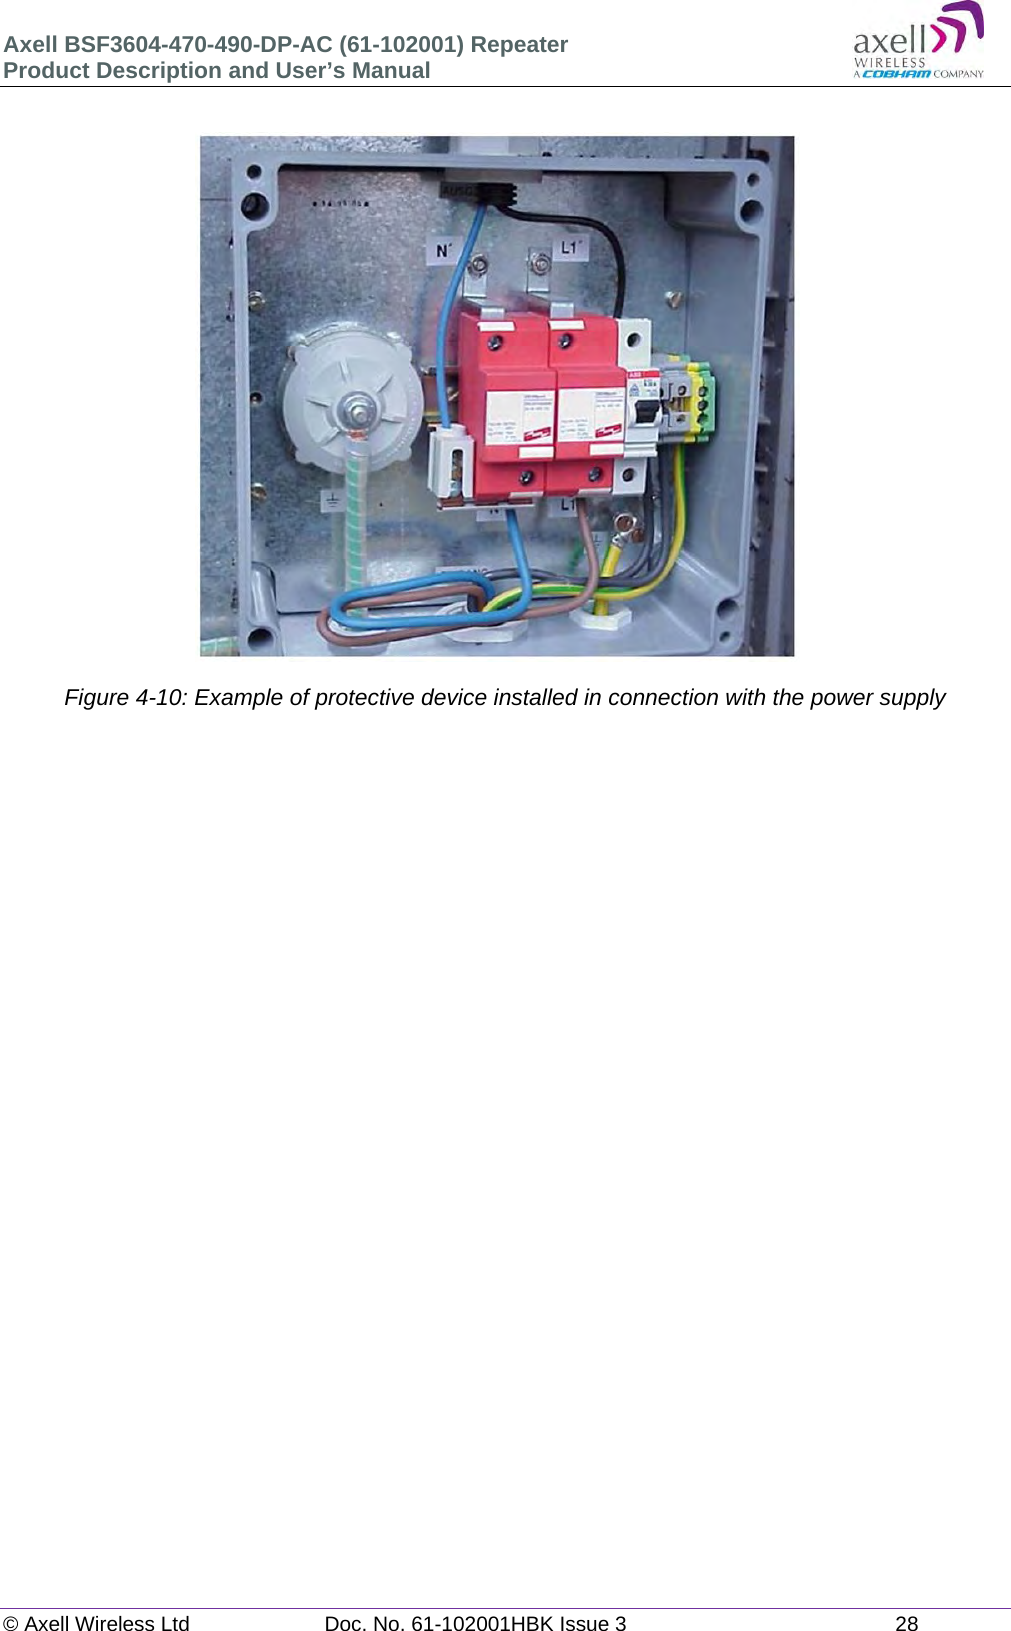 Axell BSF3604-470-490-DP-AC (61-102001) Repeater Product Description and User’s Manual © Axell Wireless Ltd  Doc. No. 61-102001HBK Issue 3  28                       Figure 4-10: Example of protective device installed in connection with the power supply        